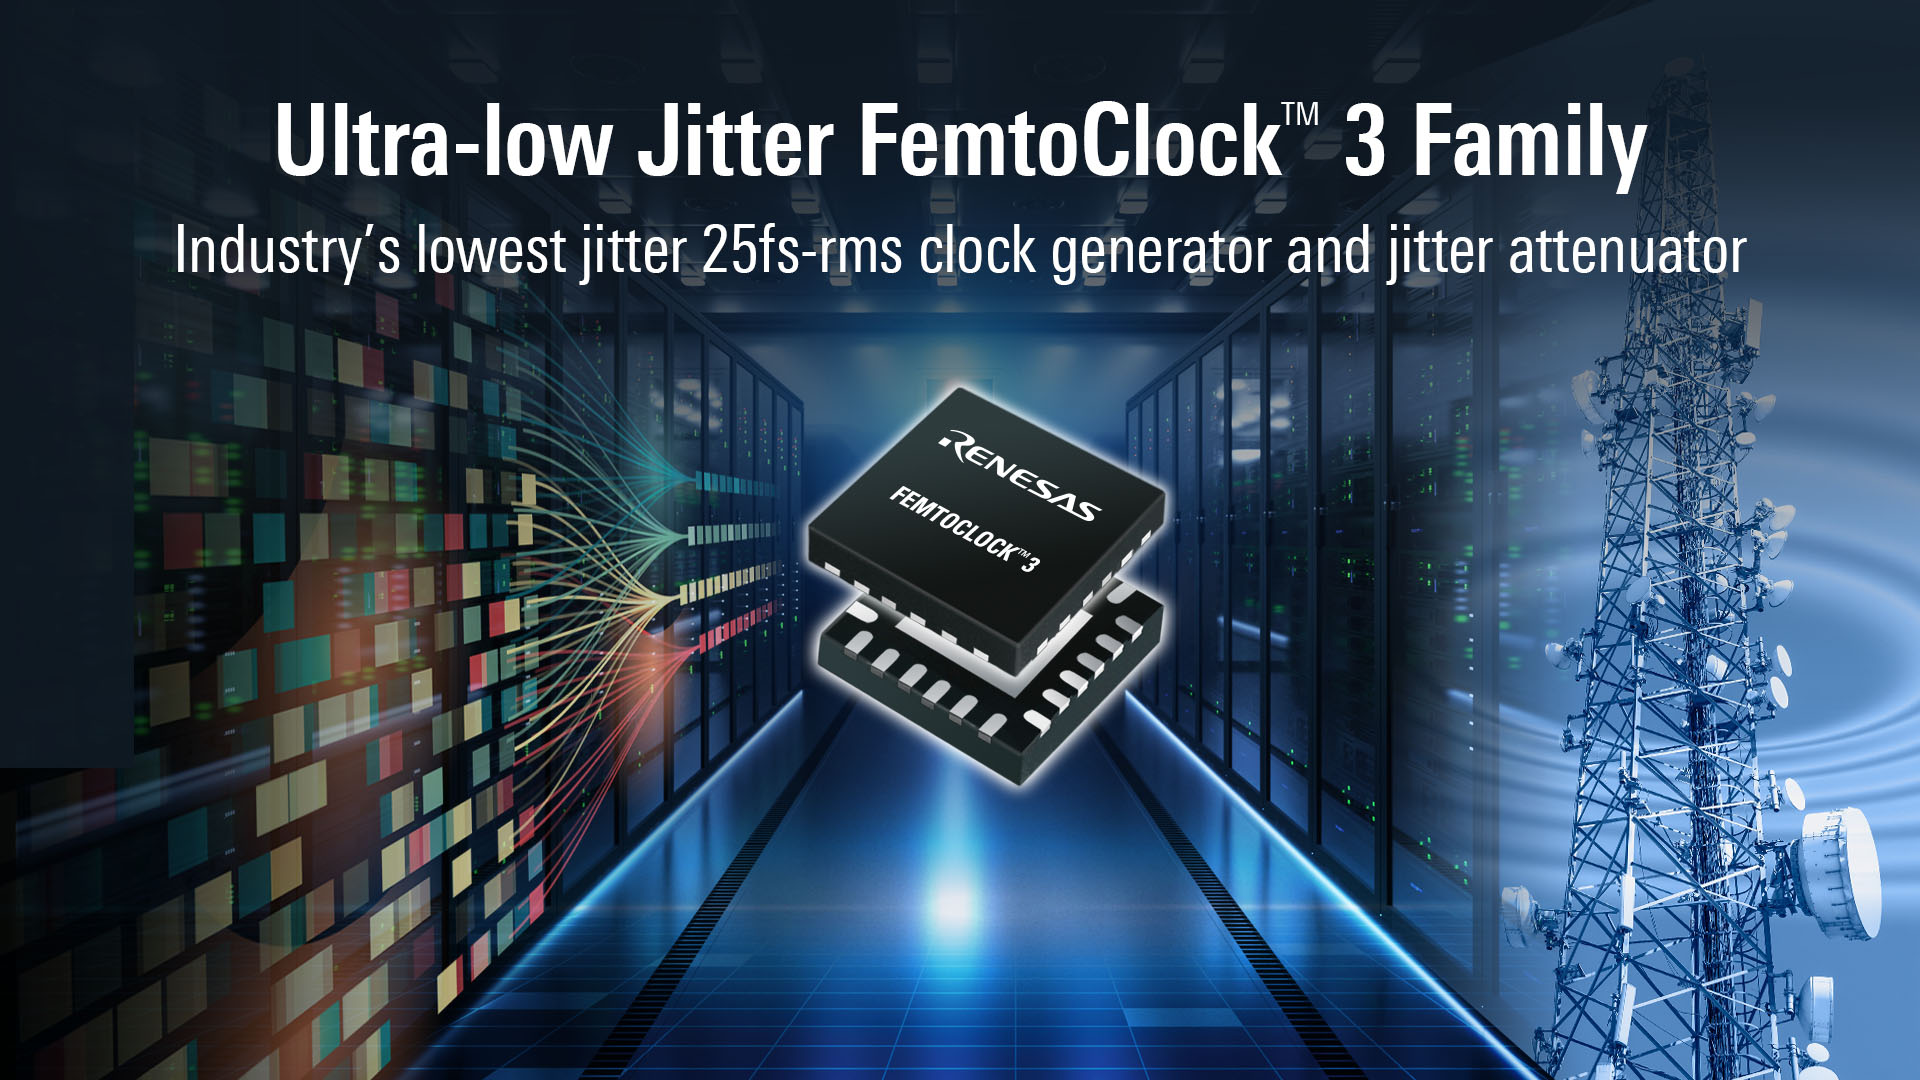 Renesas' New FemtoClock 3 Timing Solution Delivers Industry's Lowest Power and Leading Jitter Performance of 25fs-rms